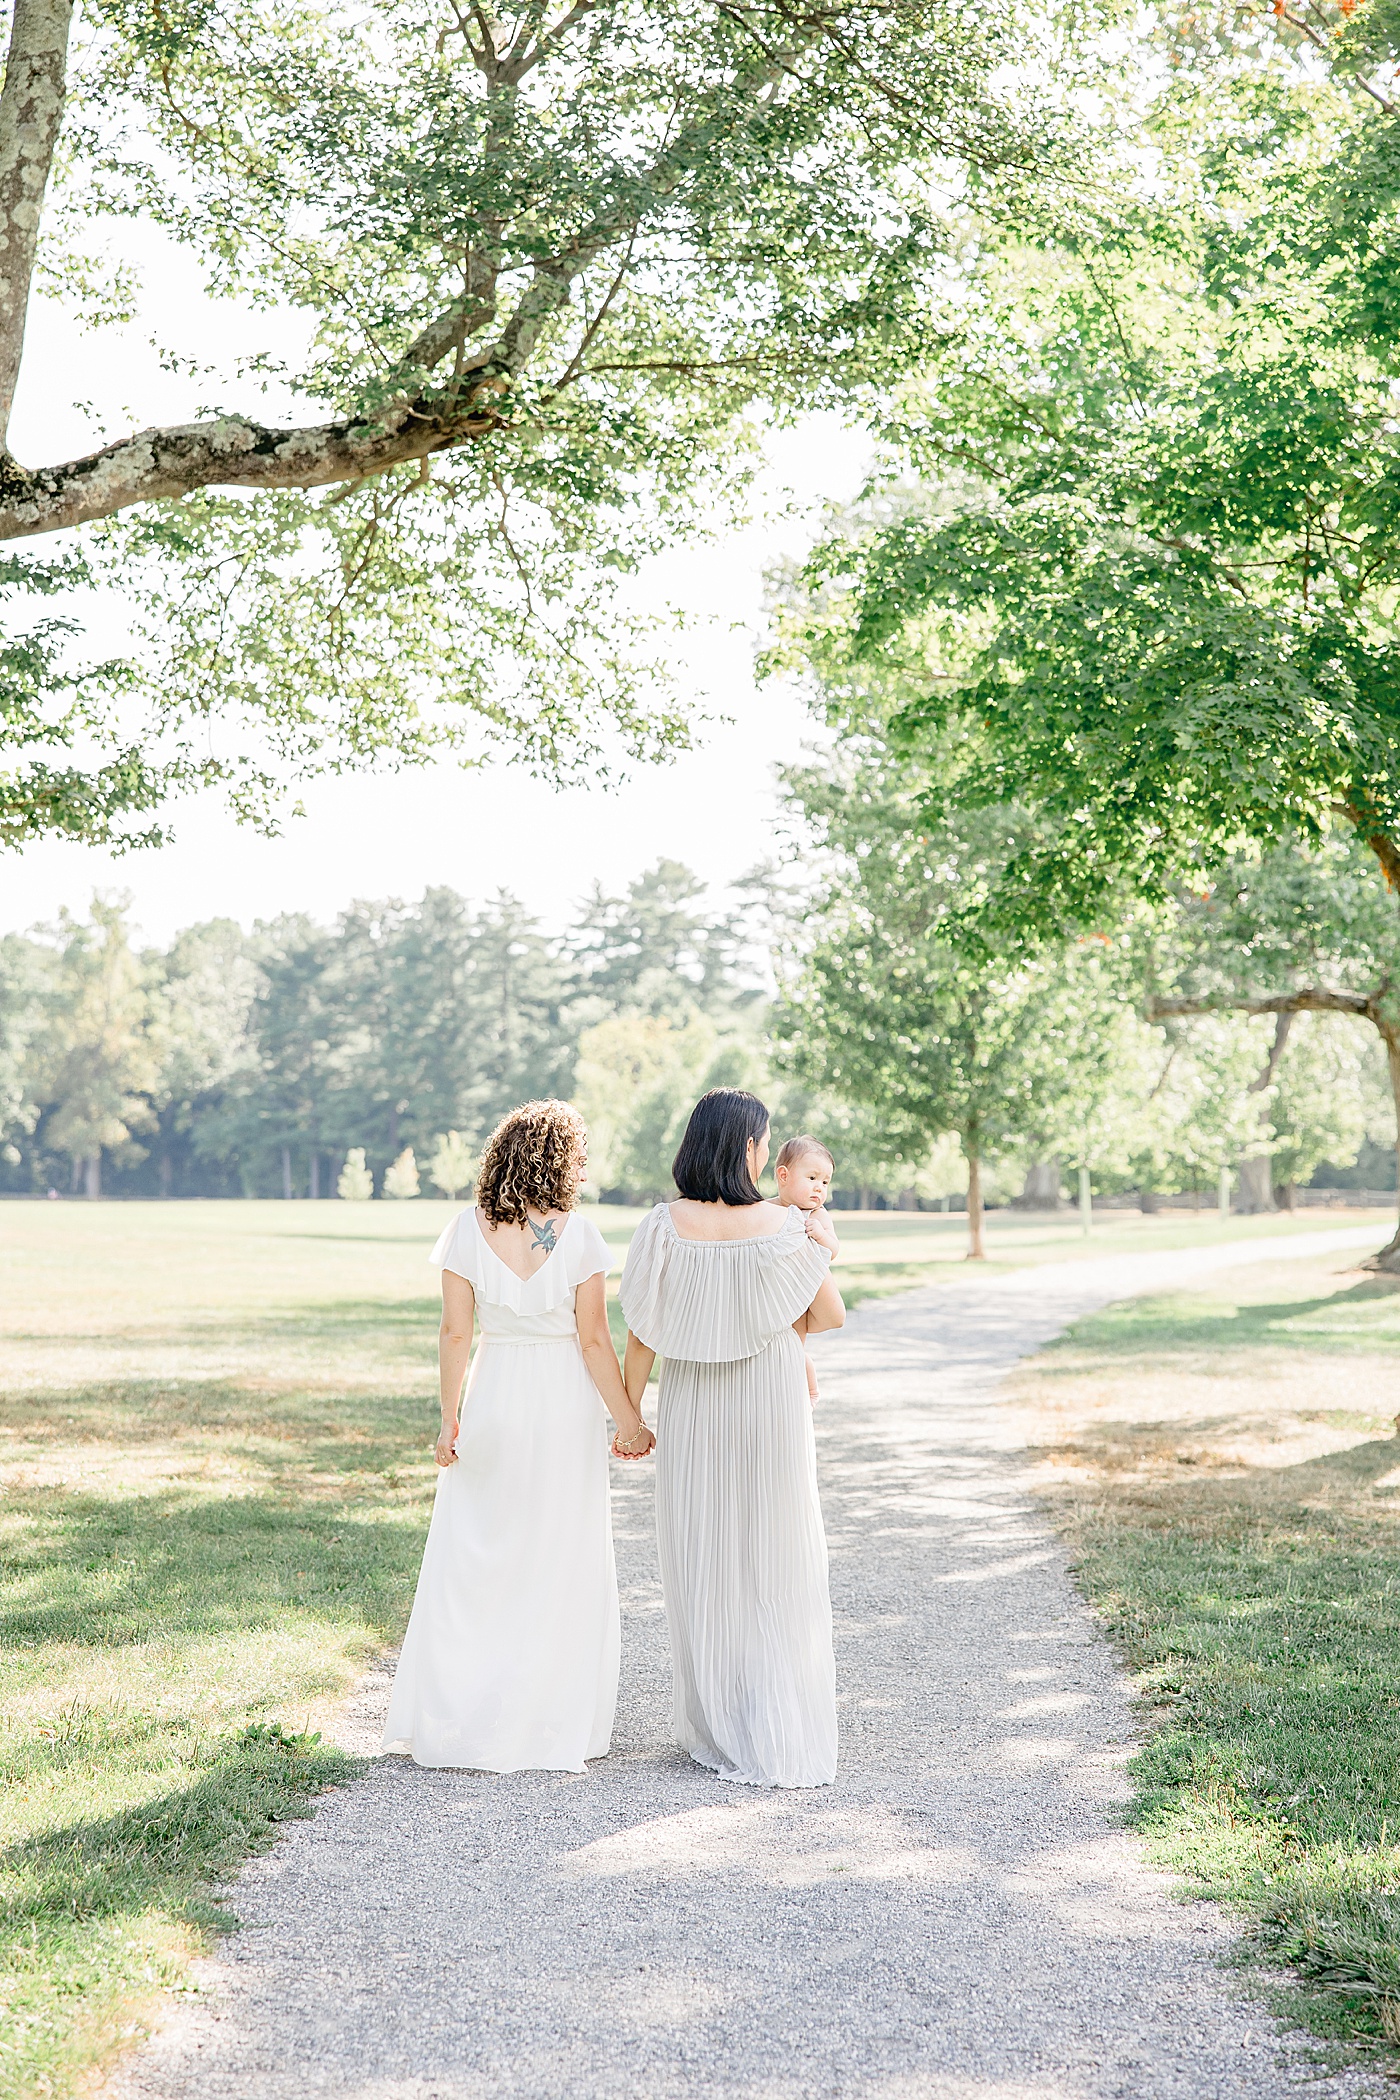 Outdoor family photos at Waveny Park in New Canaan, CT | Kristin Wood Photography